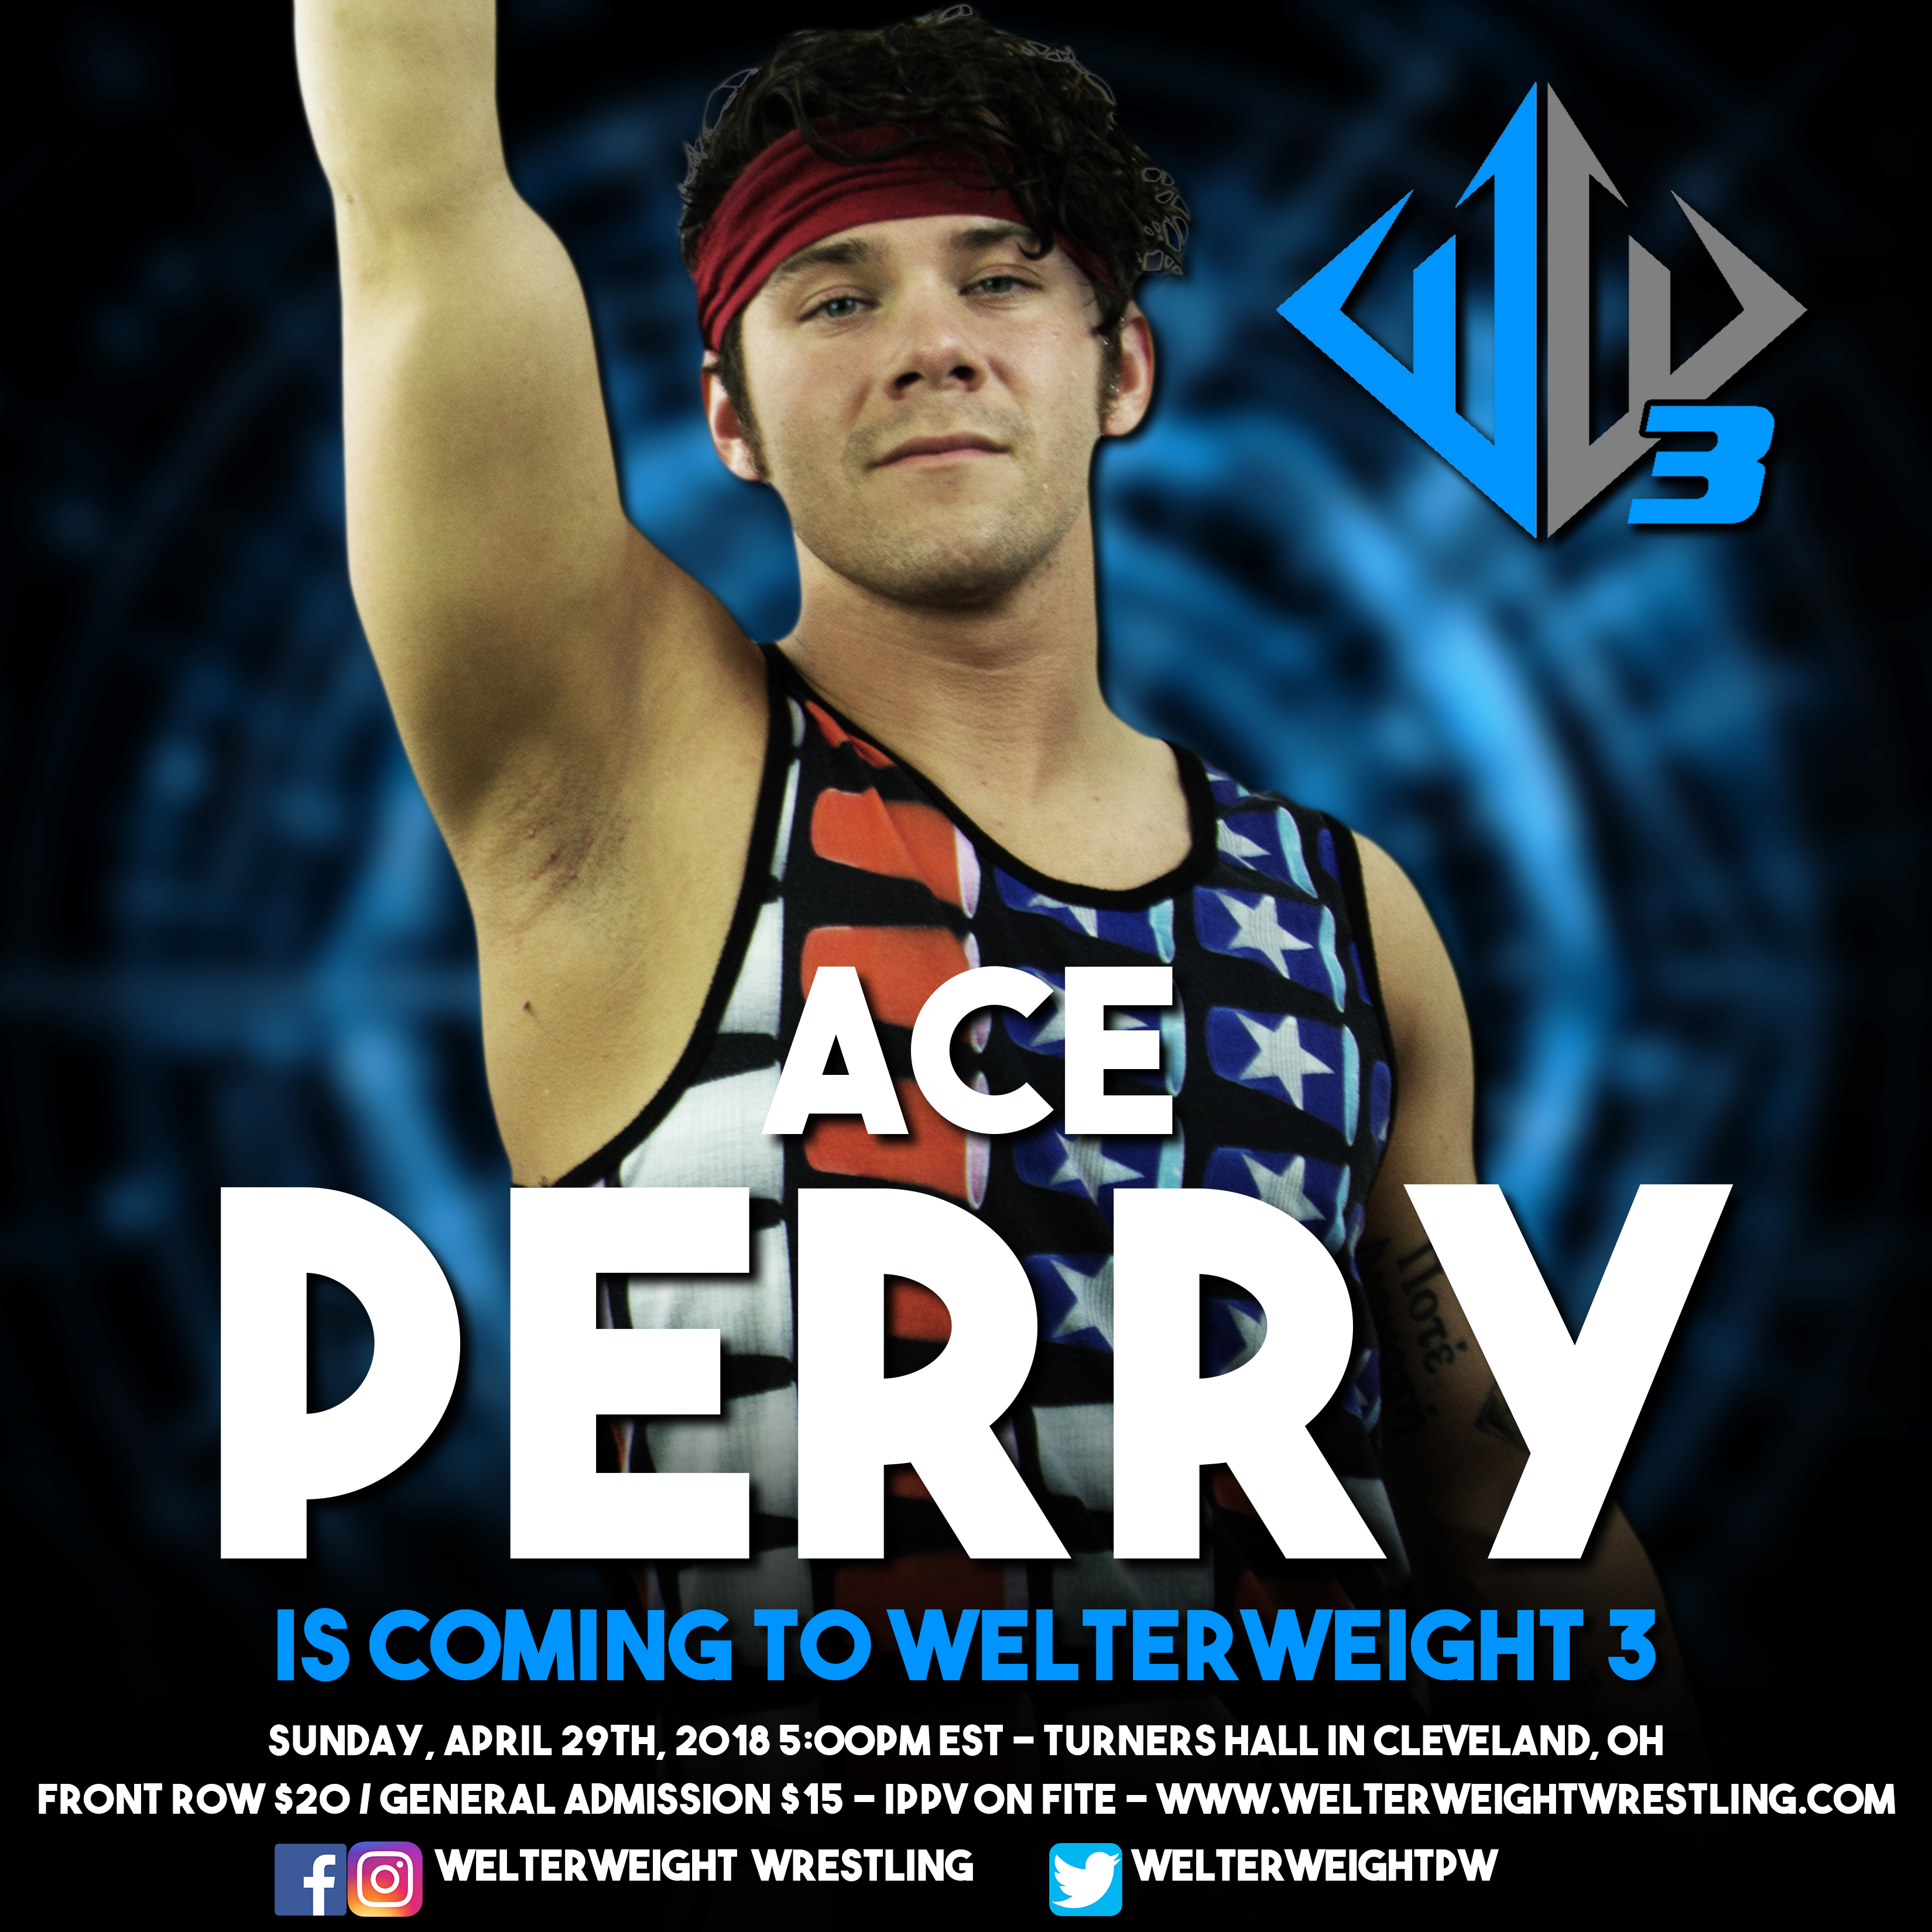 Ace Perry